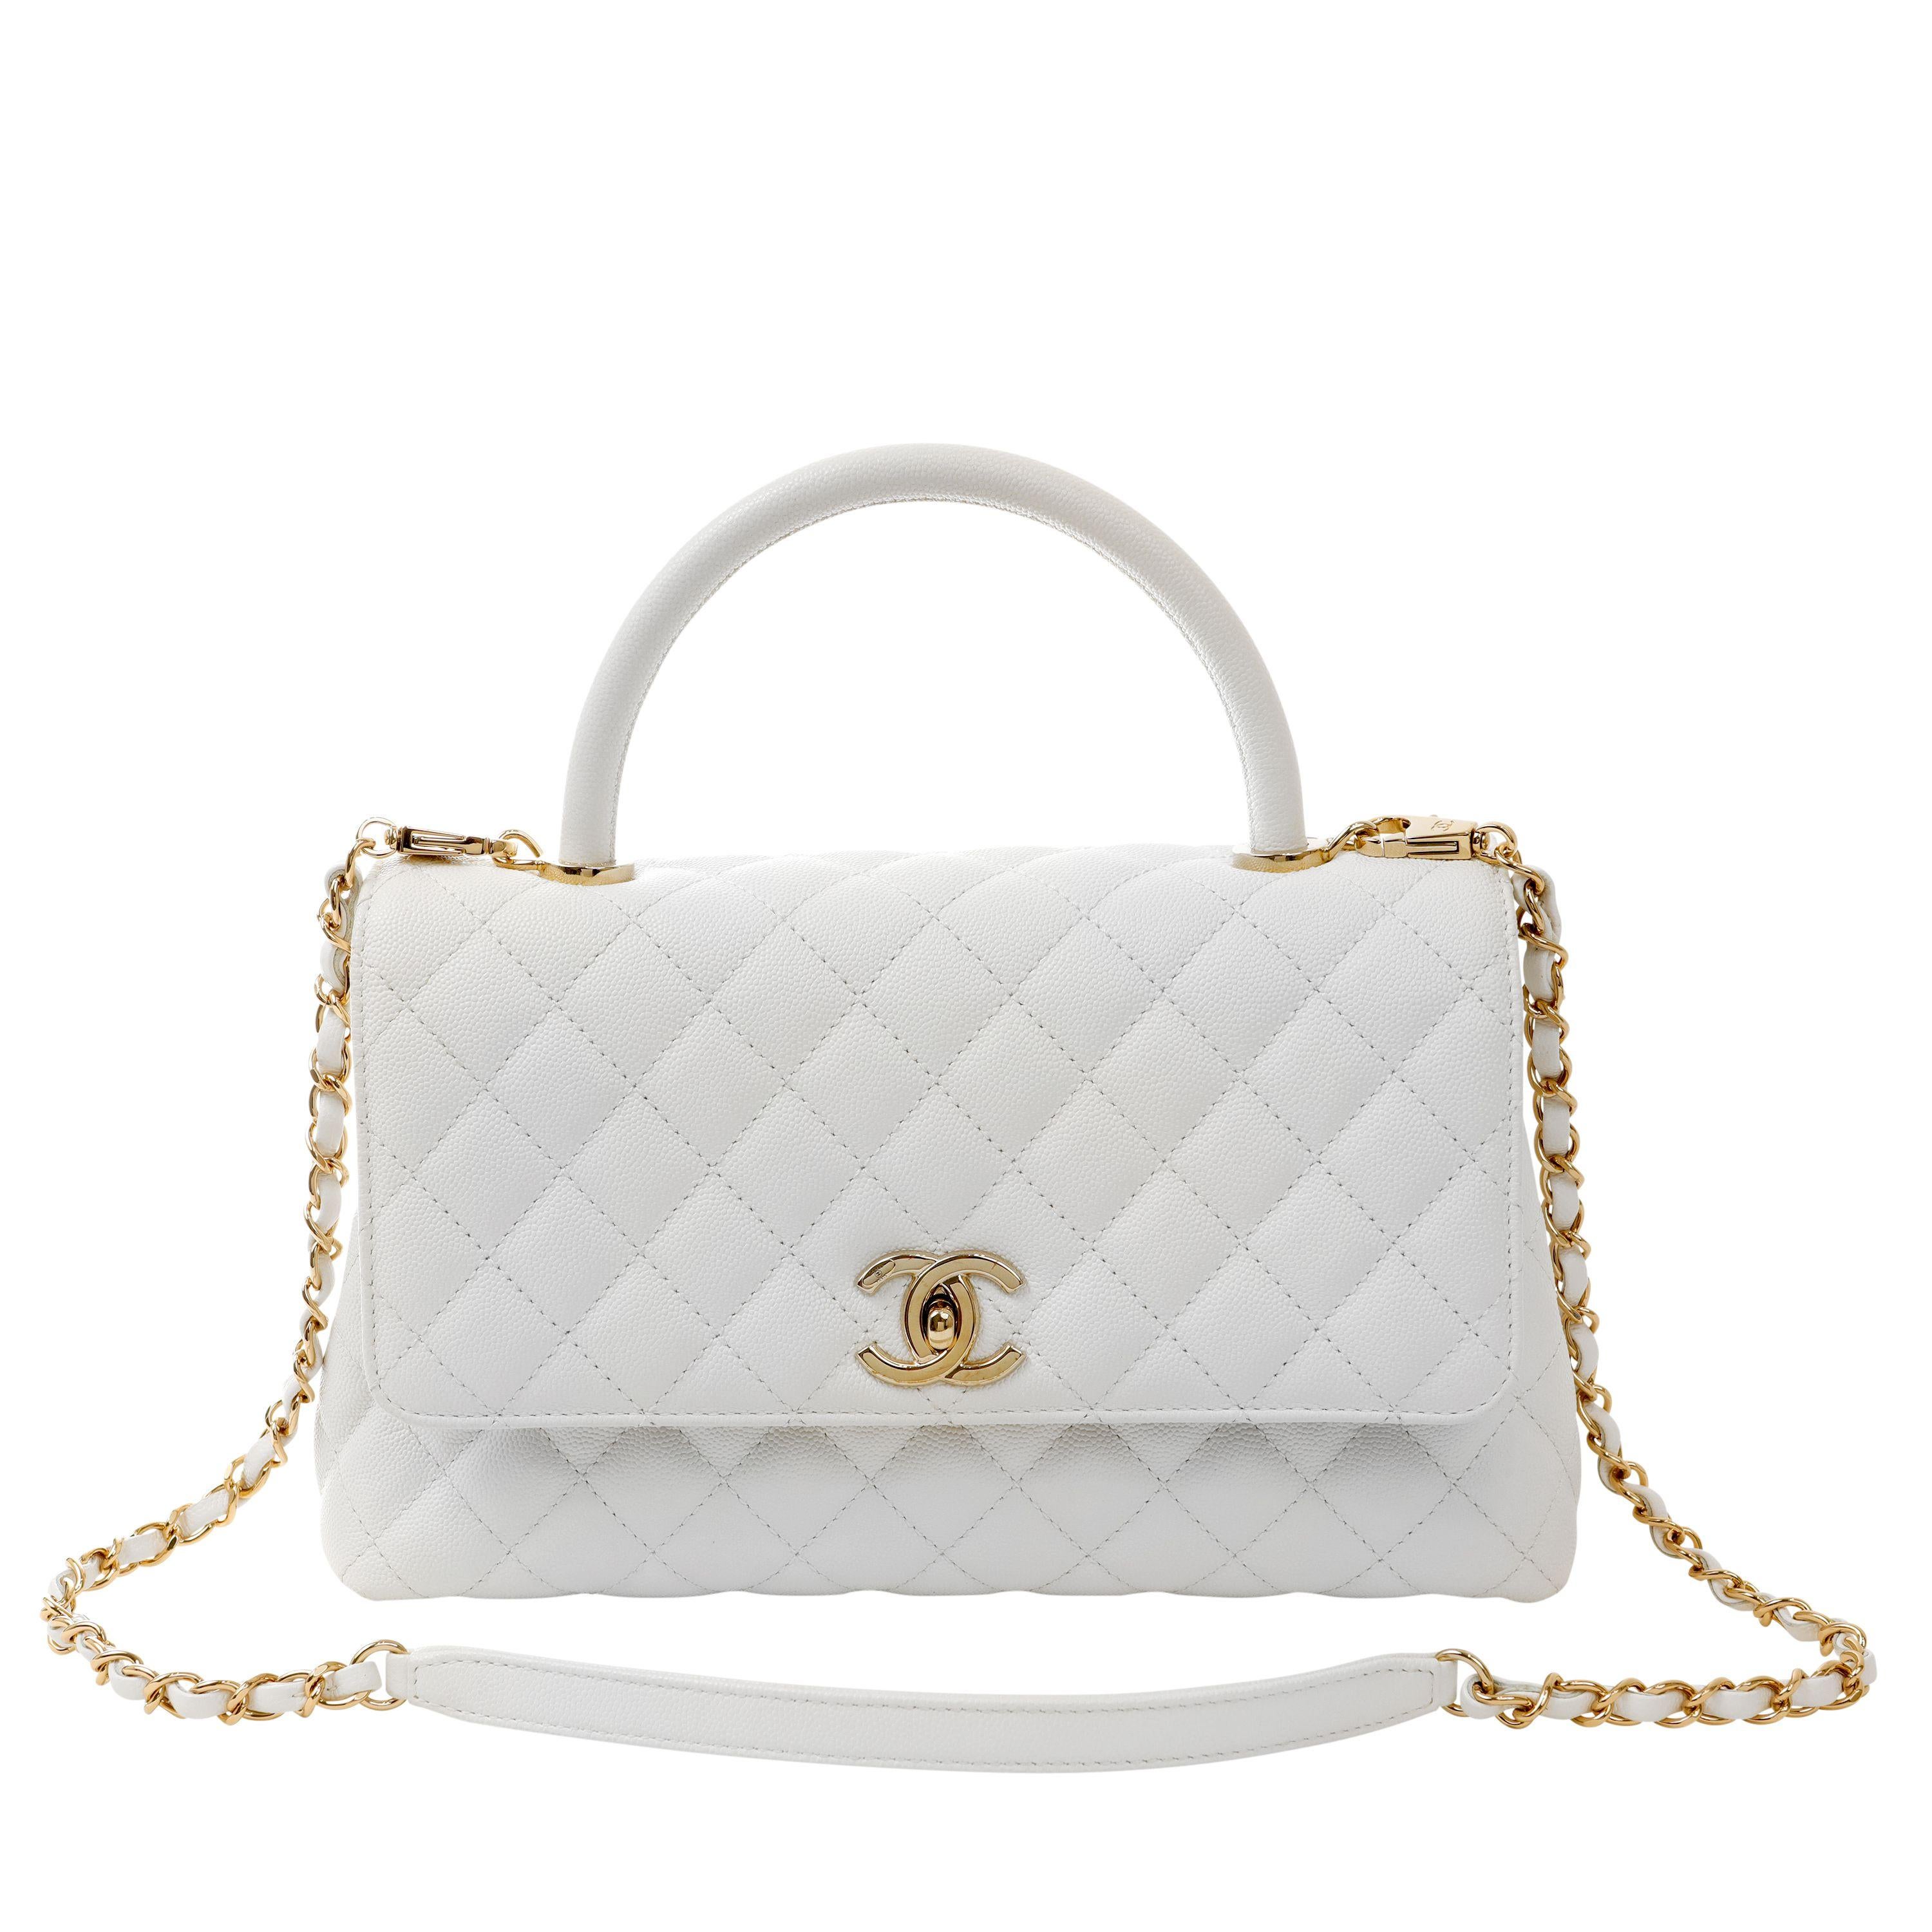 Gray Chanel White Caviar Large Lady Handle Bag with Gold Hardware